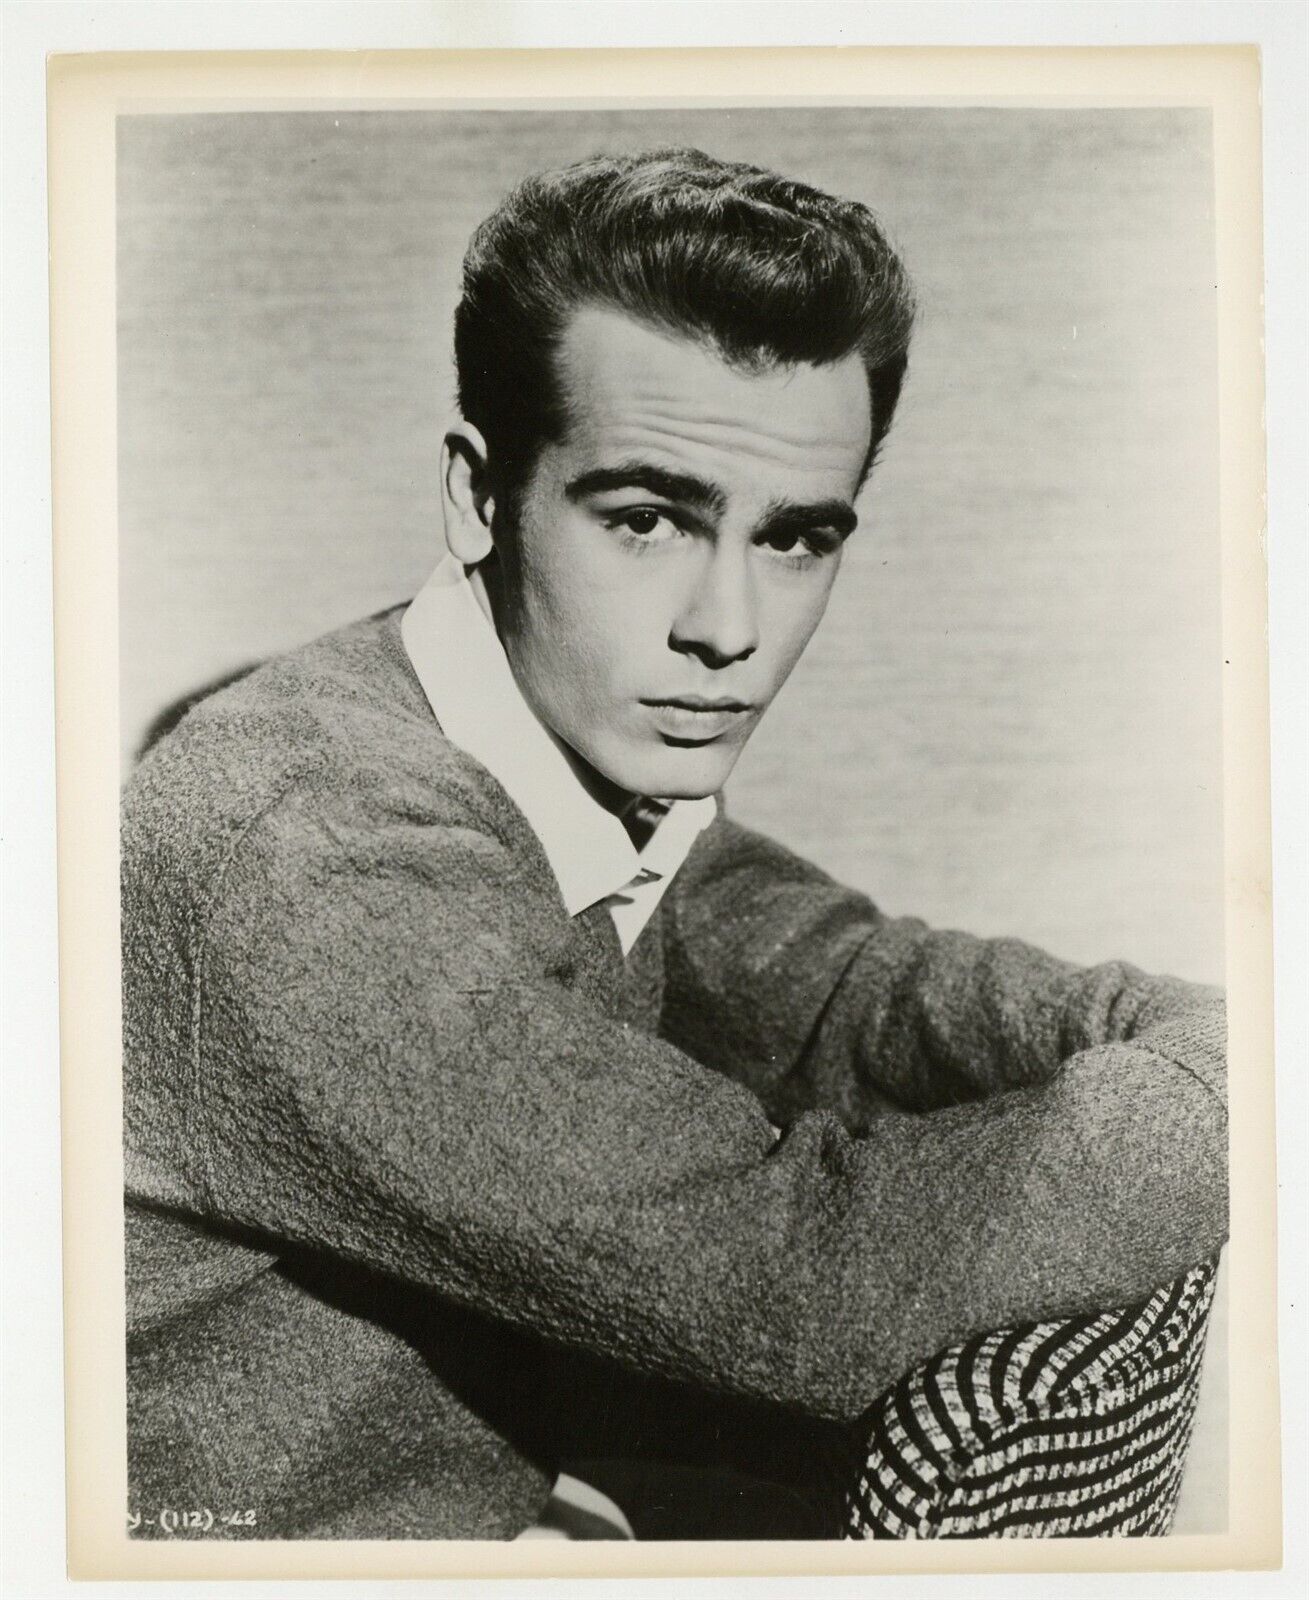 Dean Stockwell 1959 Original Portrait Photo 8x10 Handsome Young Man Actor J10470